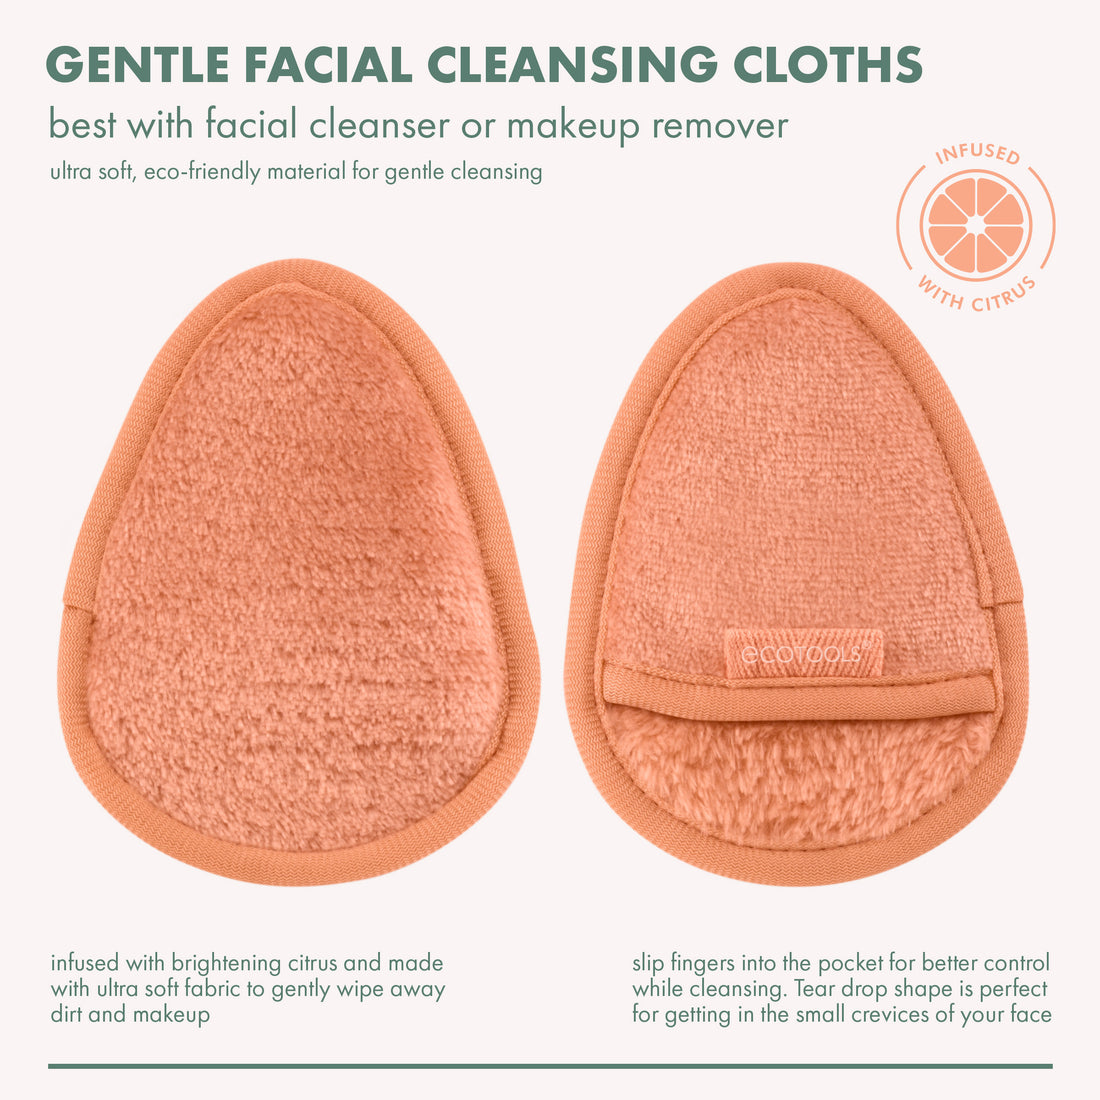 Gentle Facial Cleansing Cloths